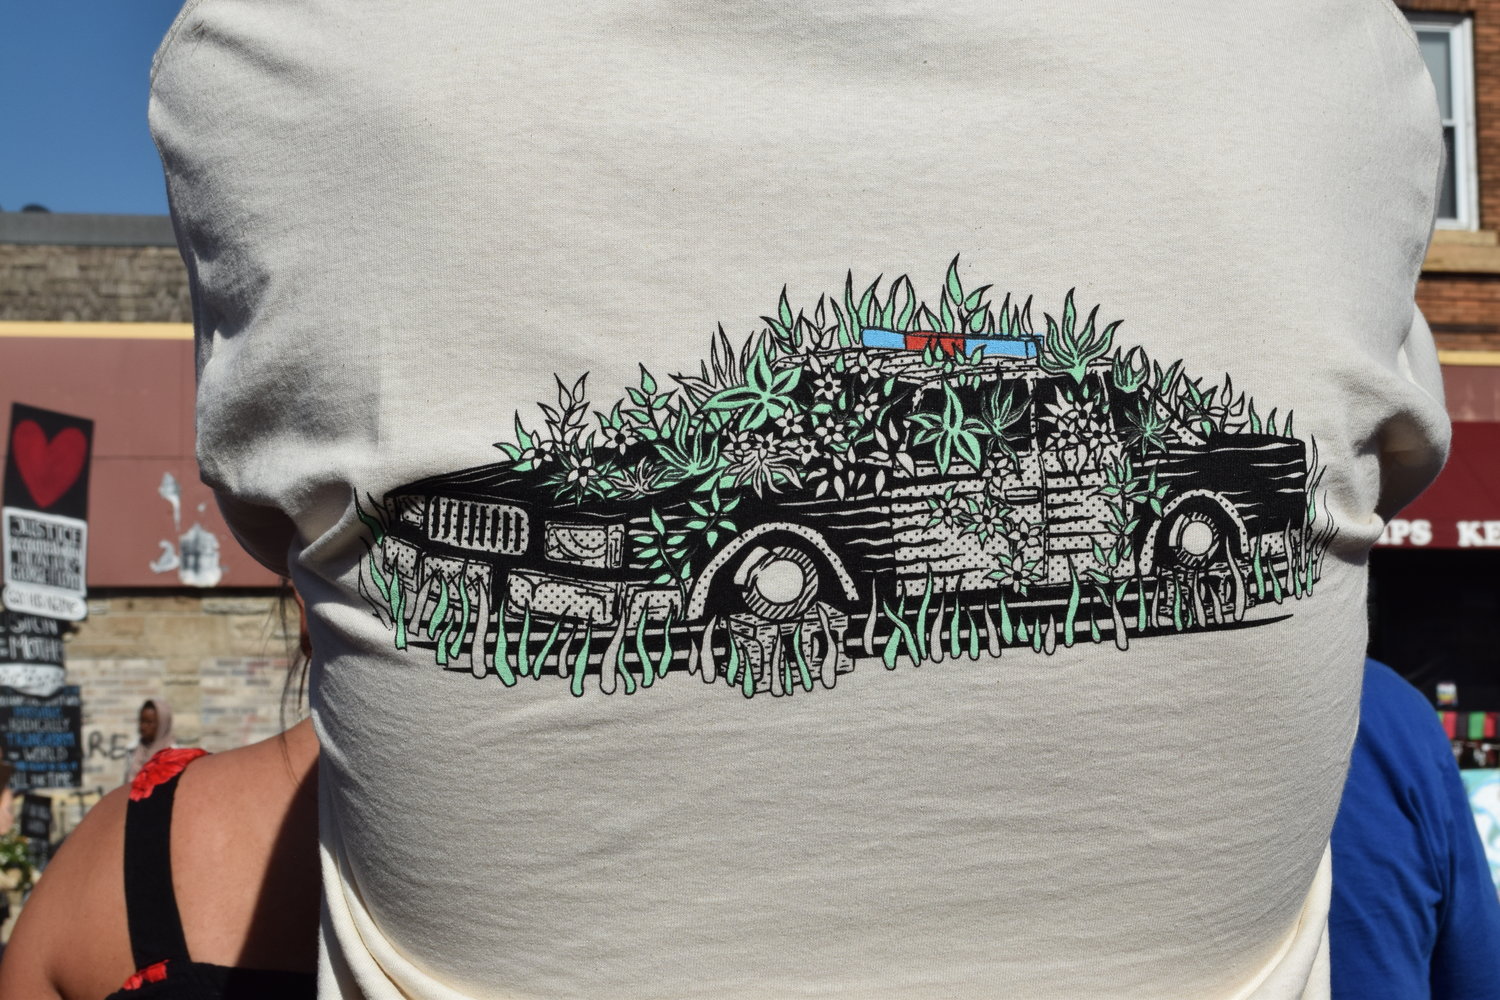 A graphic on the back of someone’s t-shirt shows plants growing out of an idle squad car.